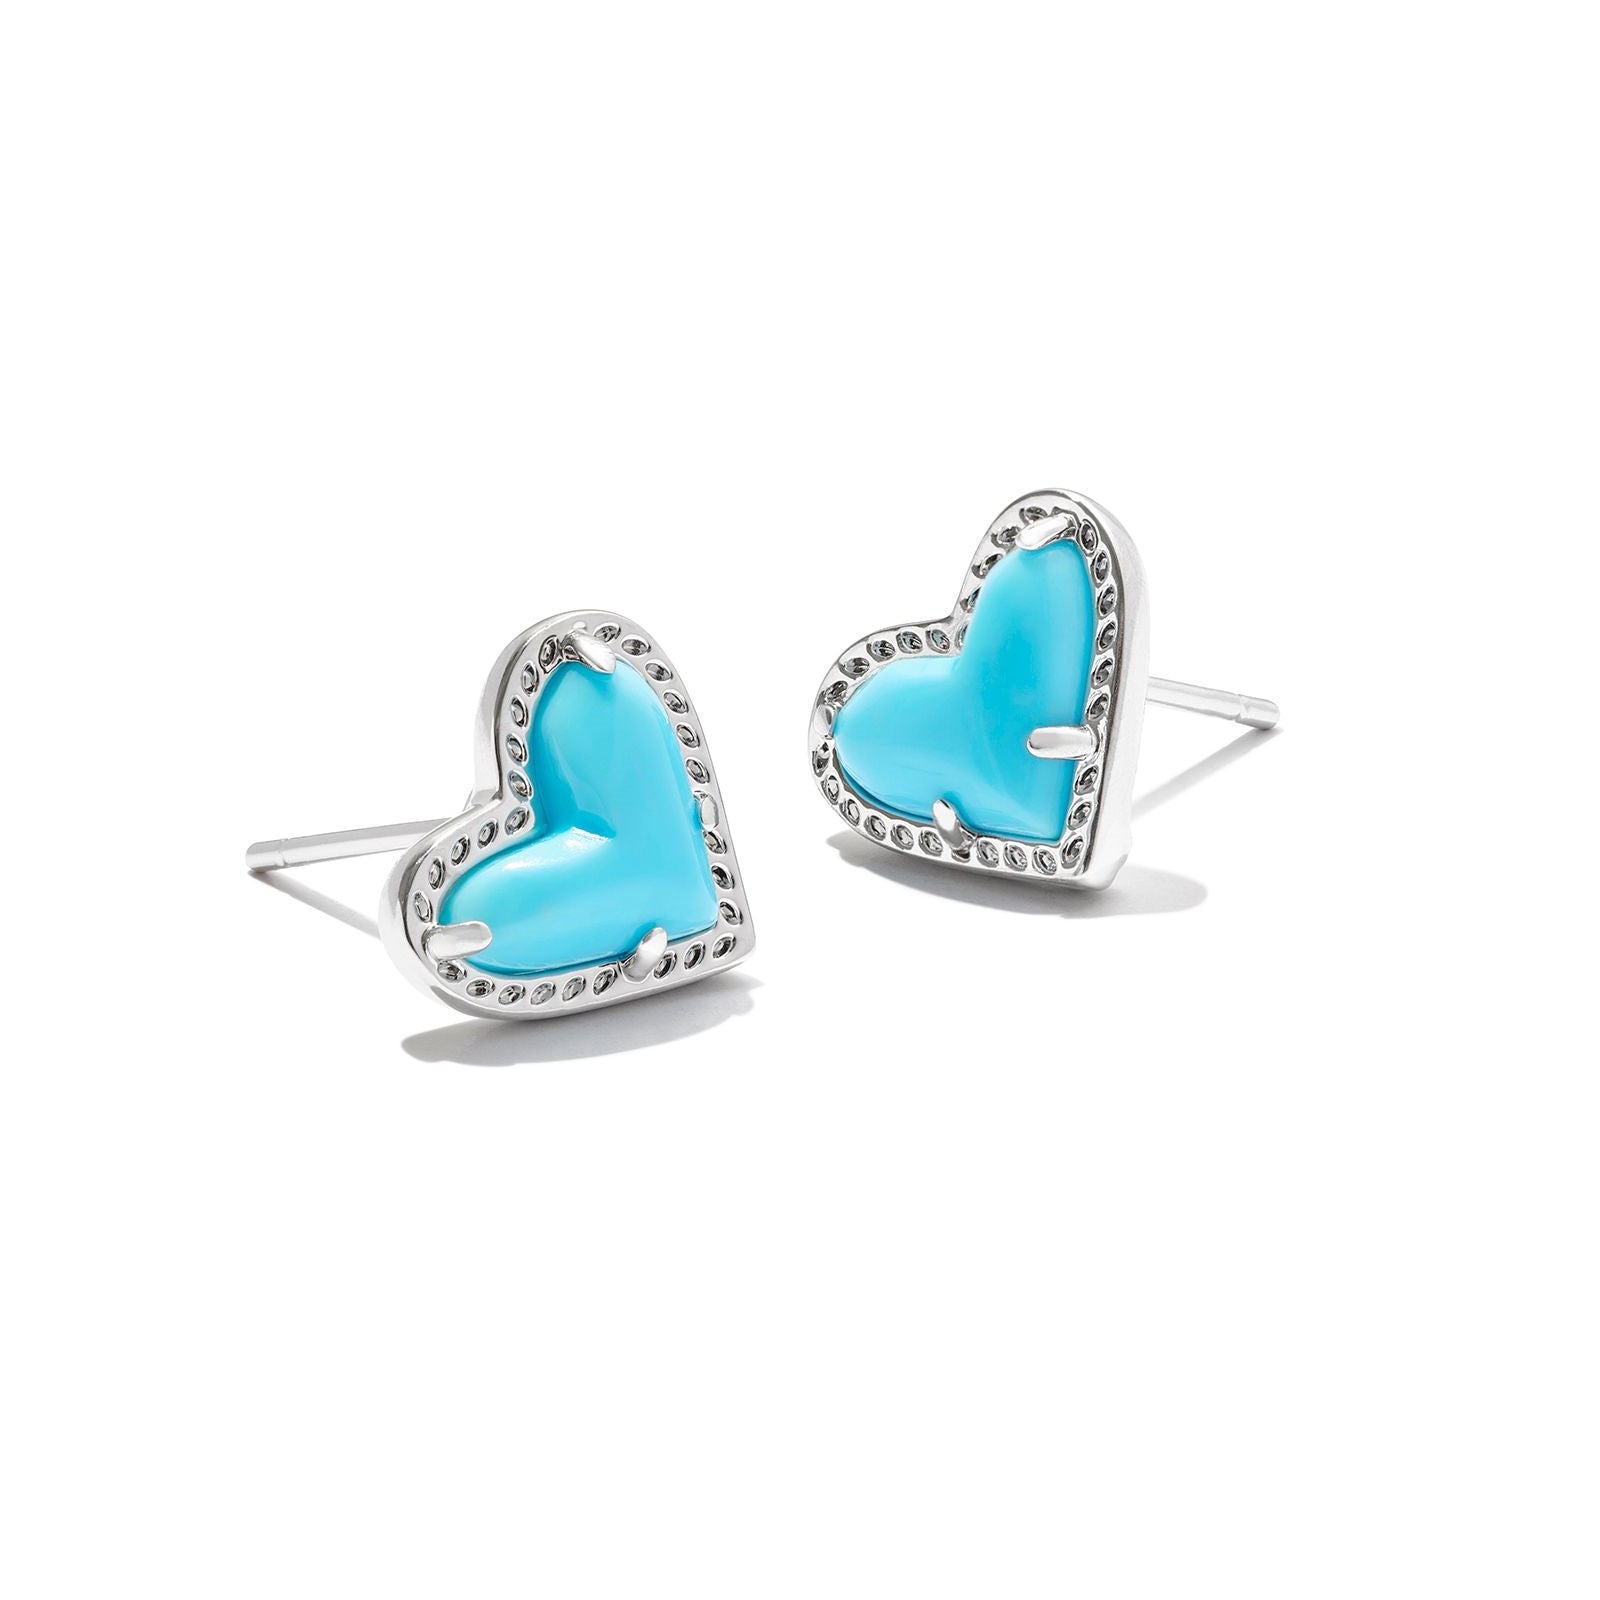 Kendra Scott | Ari Heart Silver Stud Earrings in Variegated Turquoise Magnesite - Giddy Up Glamour Boutique